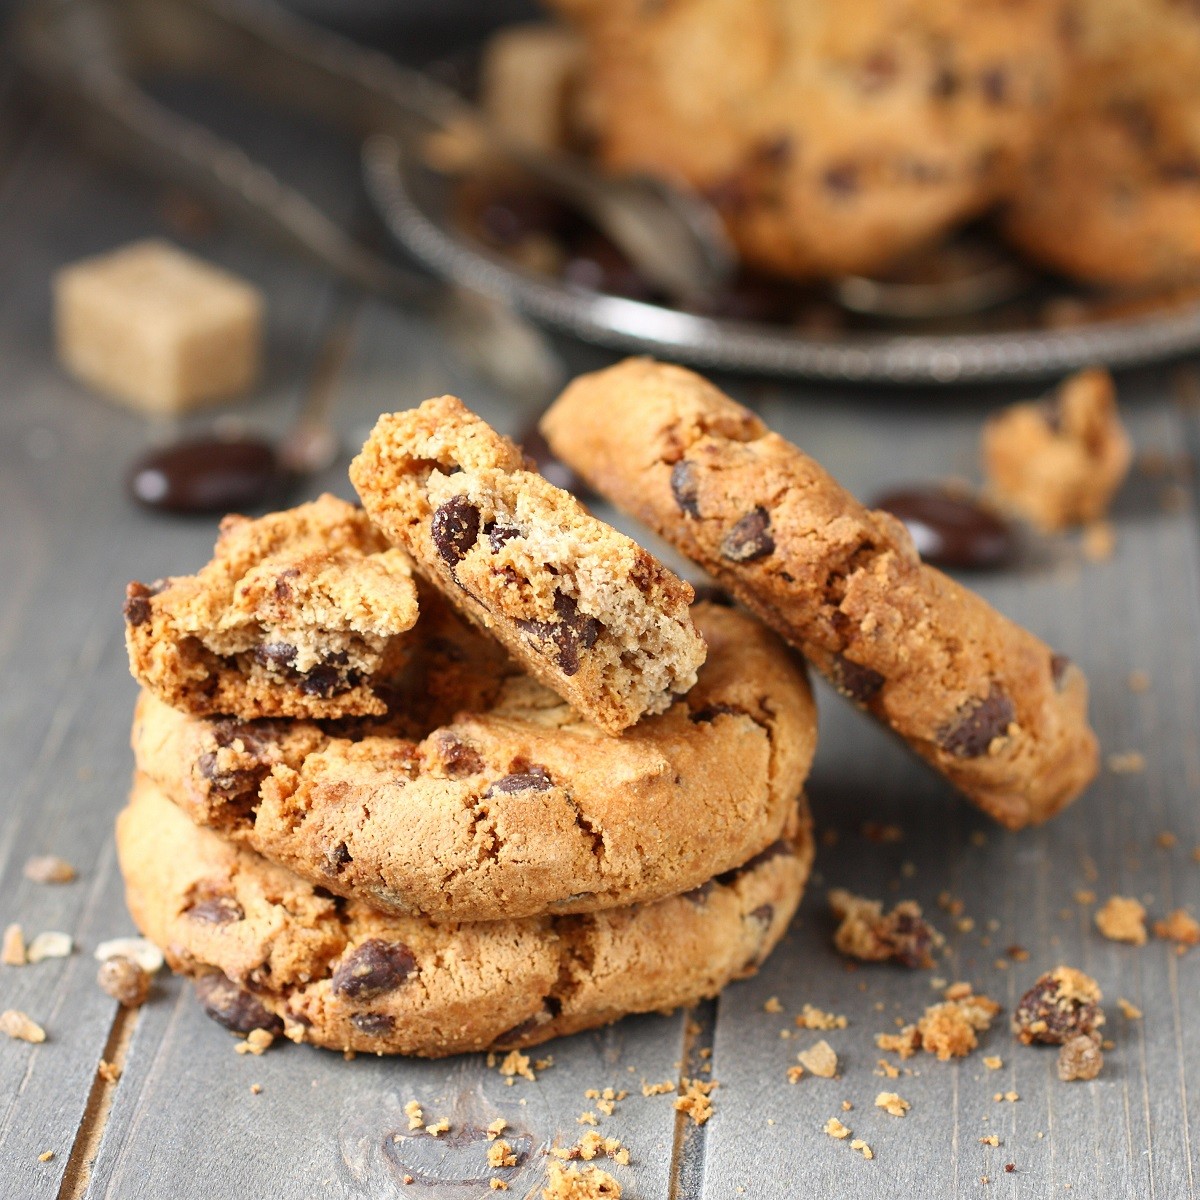 Stacked chocolate chip cookies on rustic wooden background